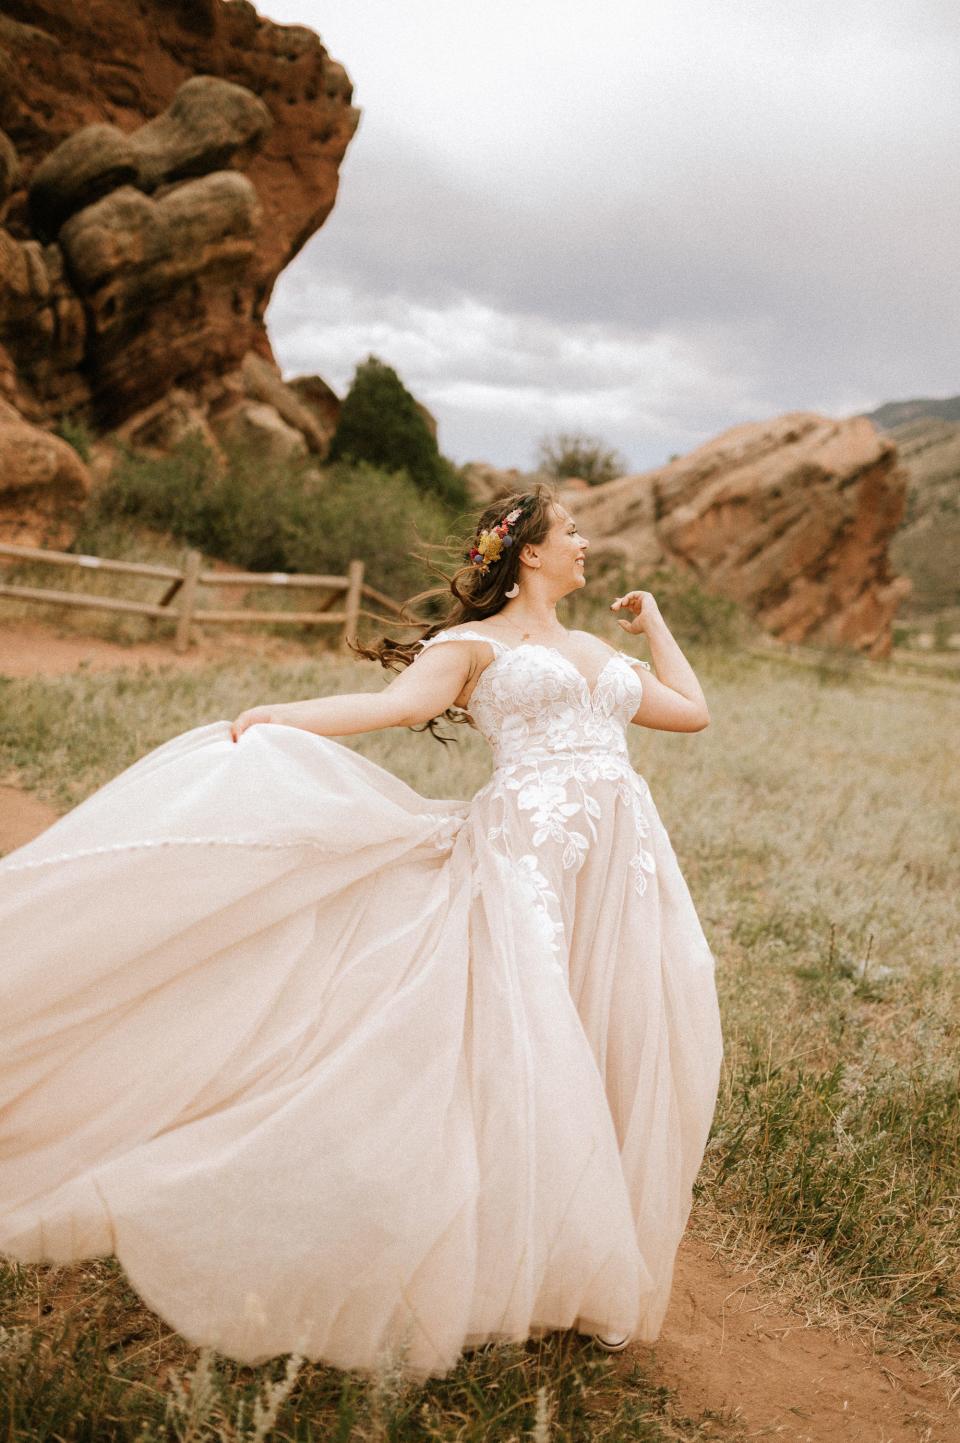 A bride stands in her wedding dress in a field as it blows in the wind.